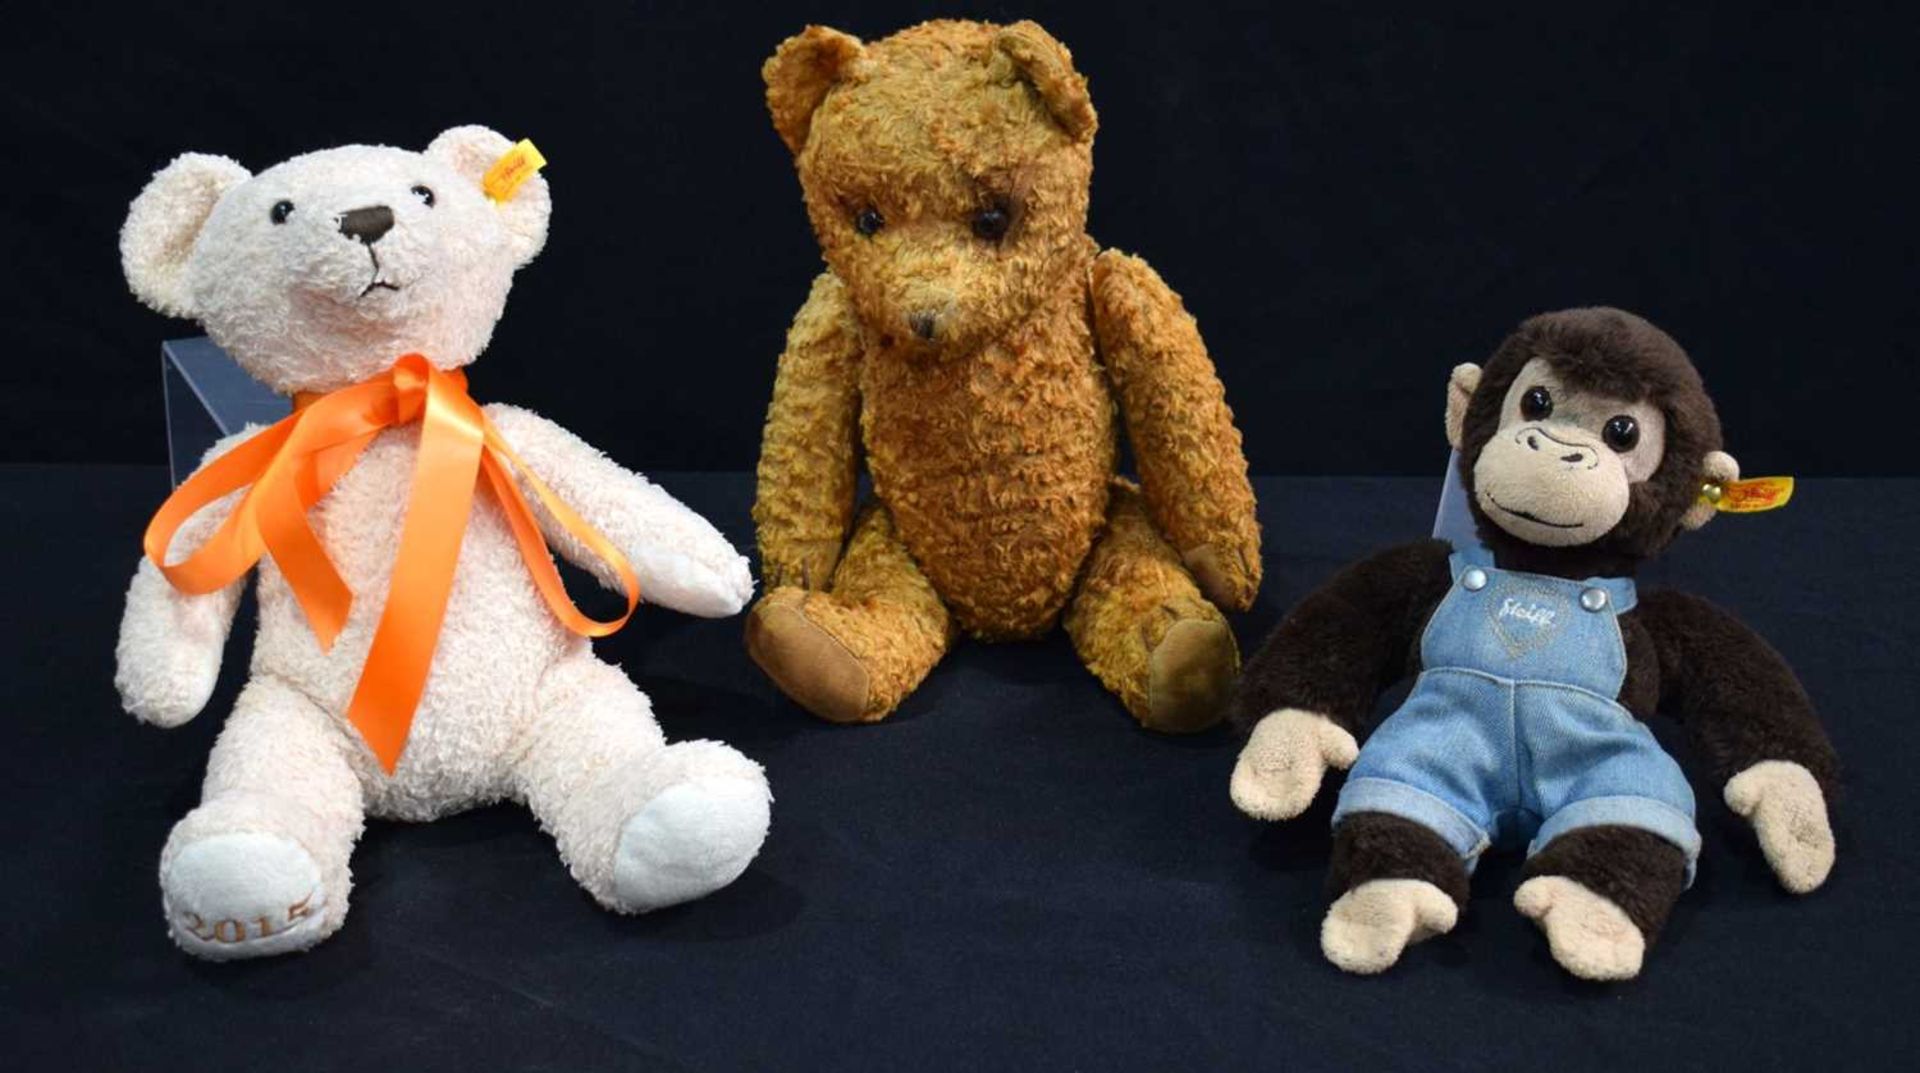 A Steiff Cosy year bear 2015 together with a Steiff monkey and another Teddy 43 cm (3).